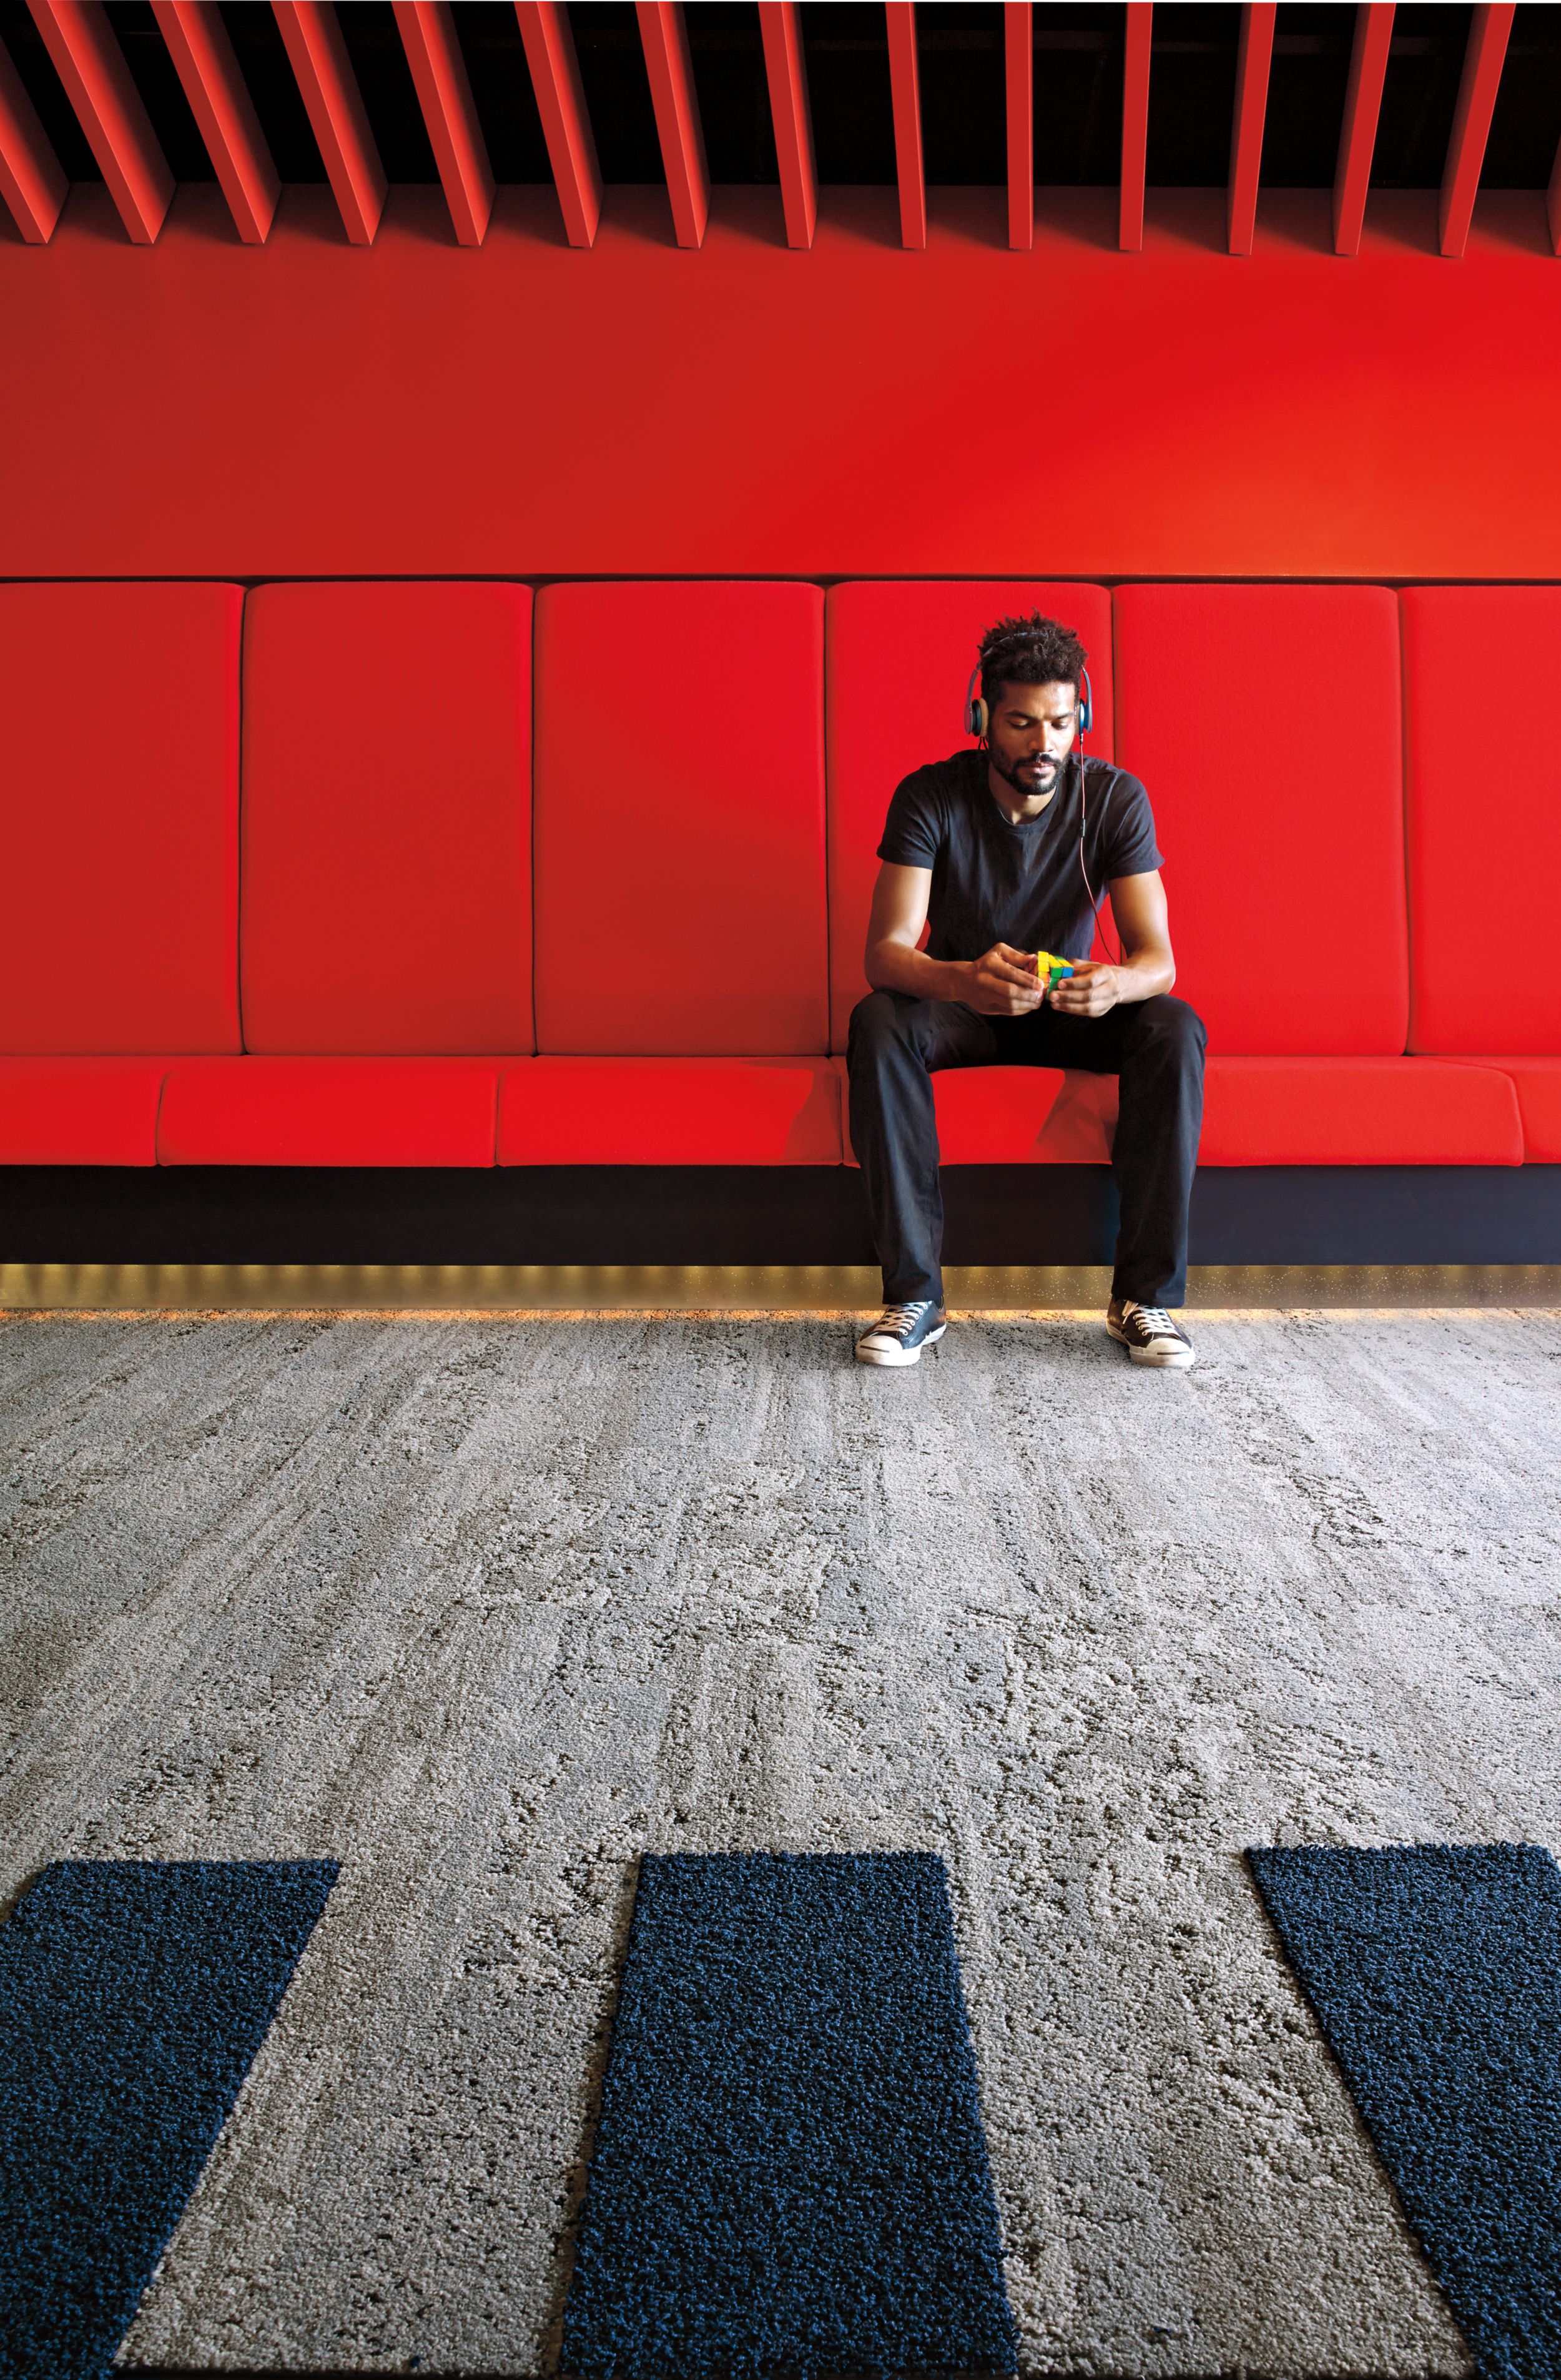 Interface HN810 plank carpet tile in waiting area with red bench and wall and man listening to music afbeeldingnummer 3